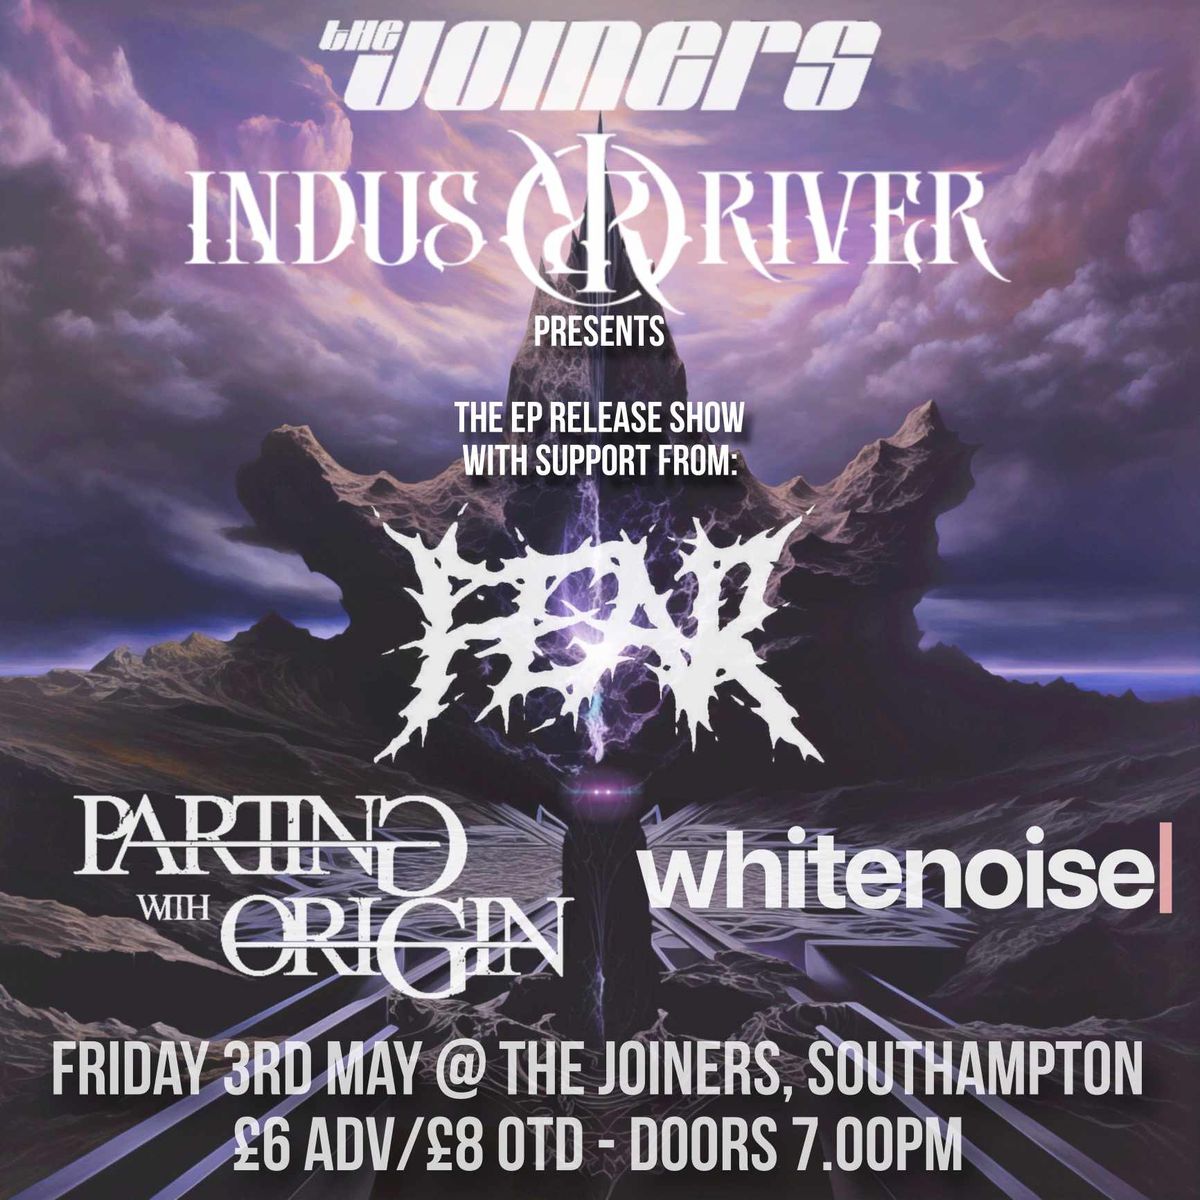 Indus River Release Show + FEAR + Parting with Origin + Whitenoise at The Joiners, Southampton